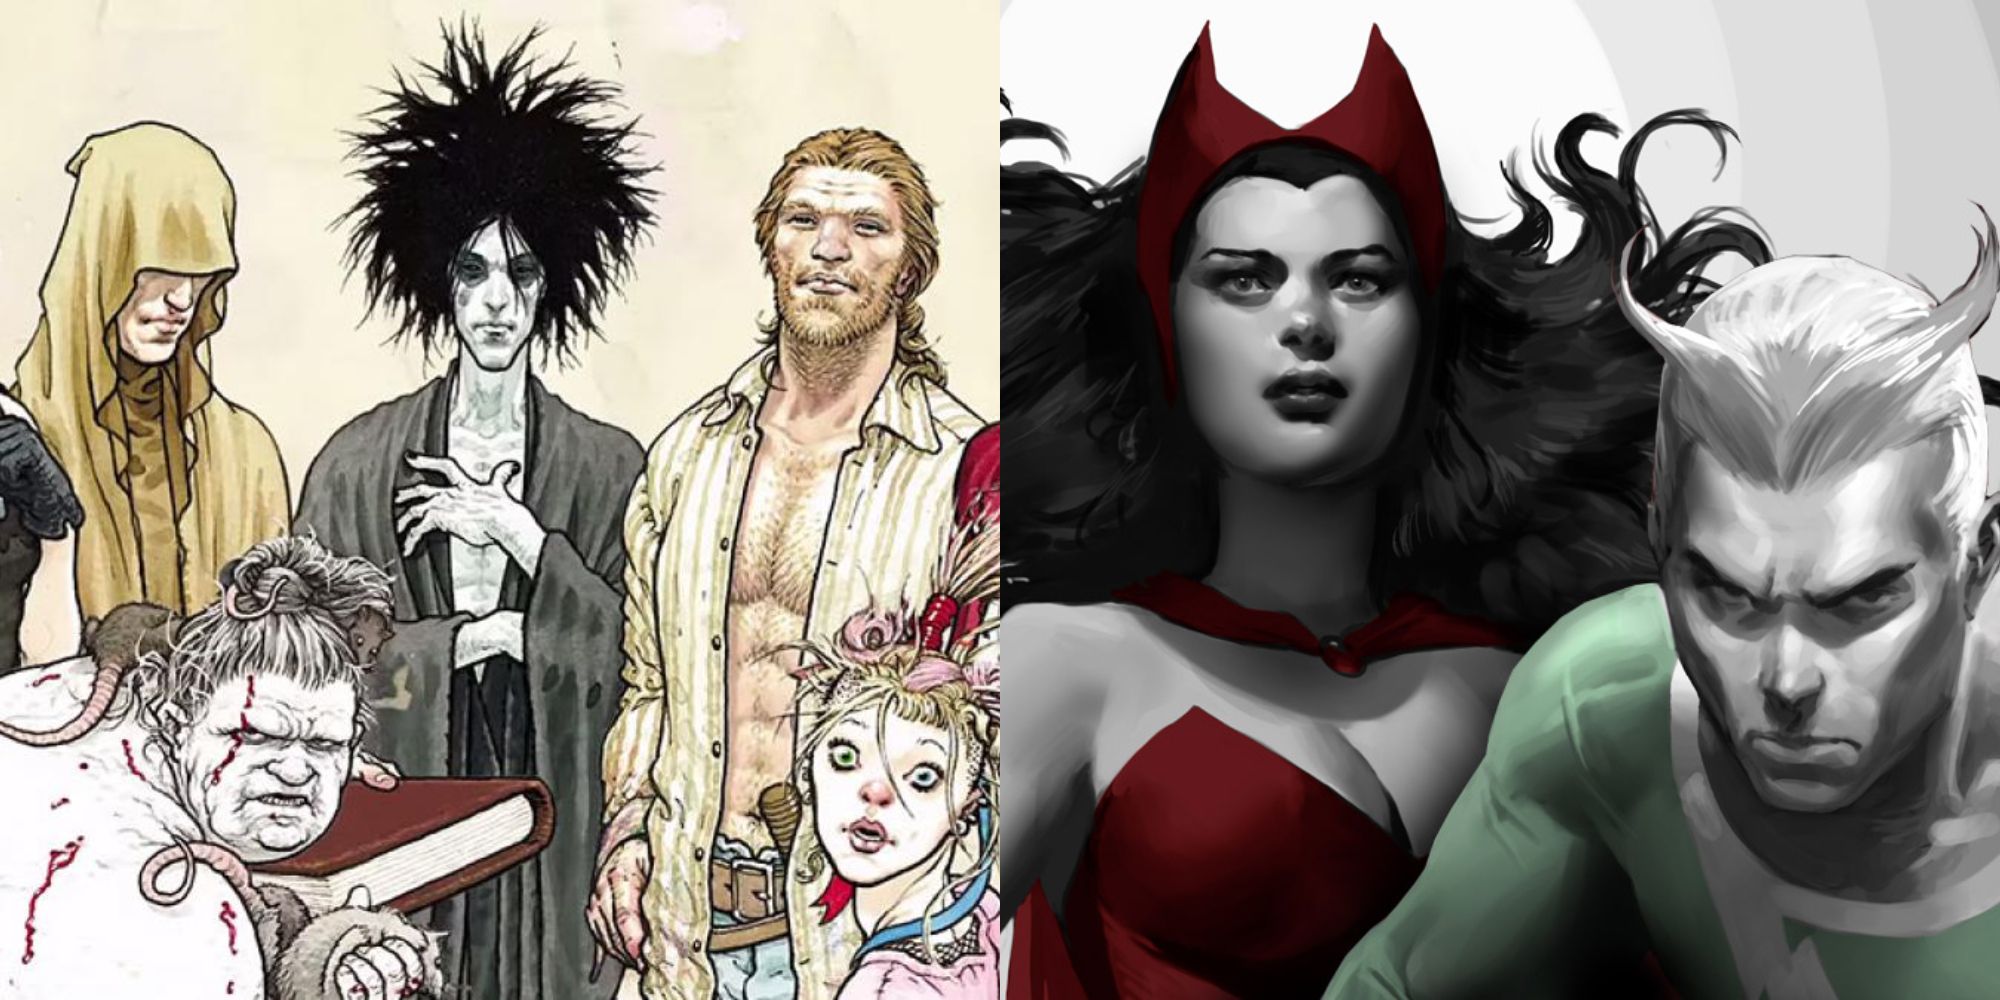 Split image showing the Endless from Sandman and Wanda and Pietro from Marvel Comics.